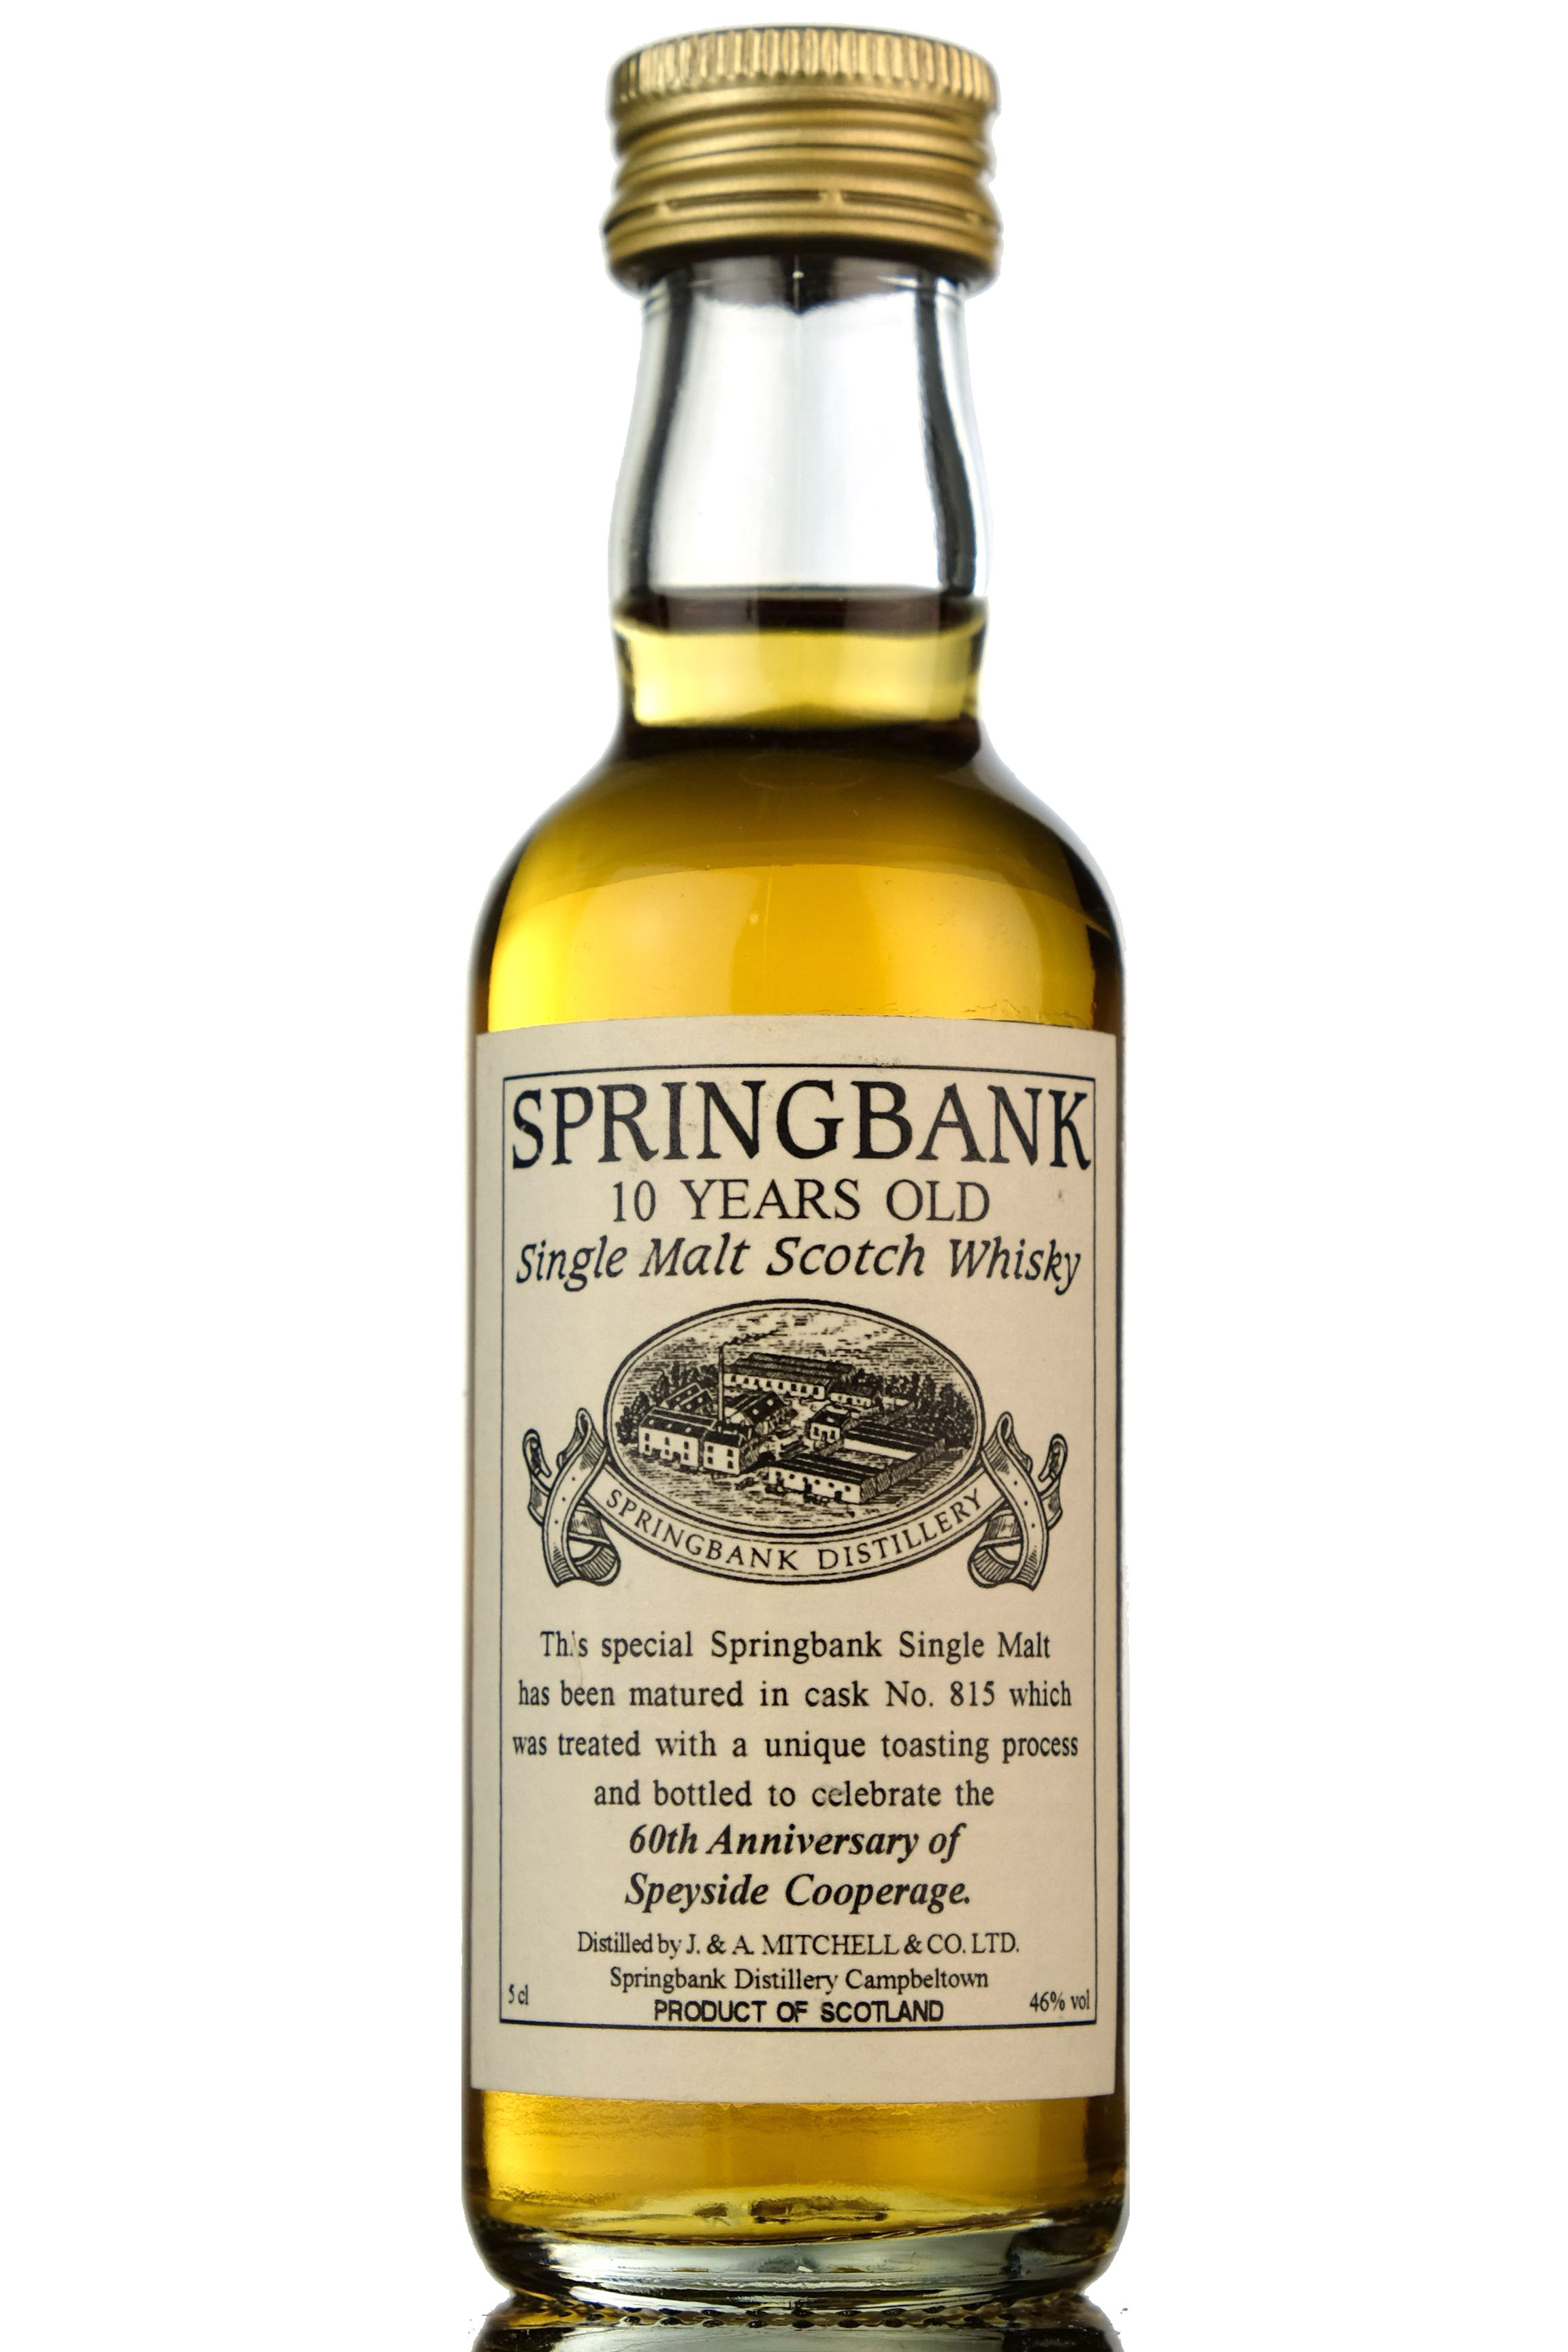 SPRINGBANK 10 YEAR OLD - 60TH ANNIVERSARY OF SPEYSIDE COOPERAGE MINIATURE